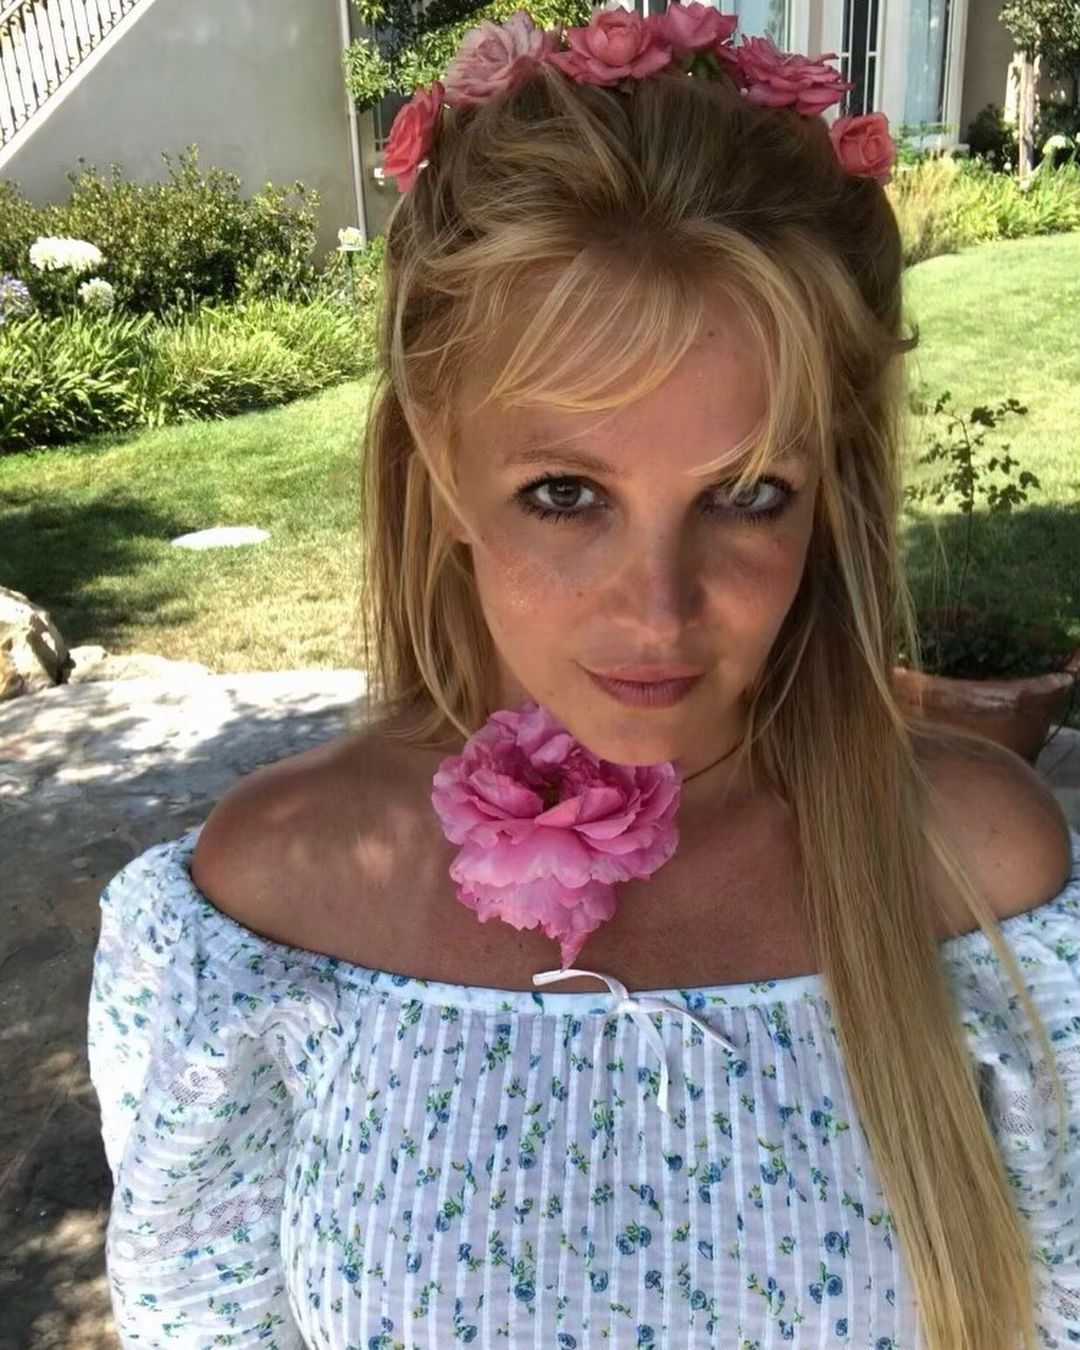 Britney Spears outdoors in a top